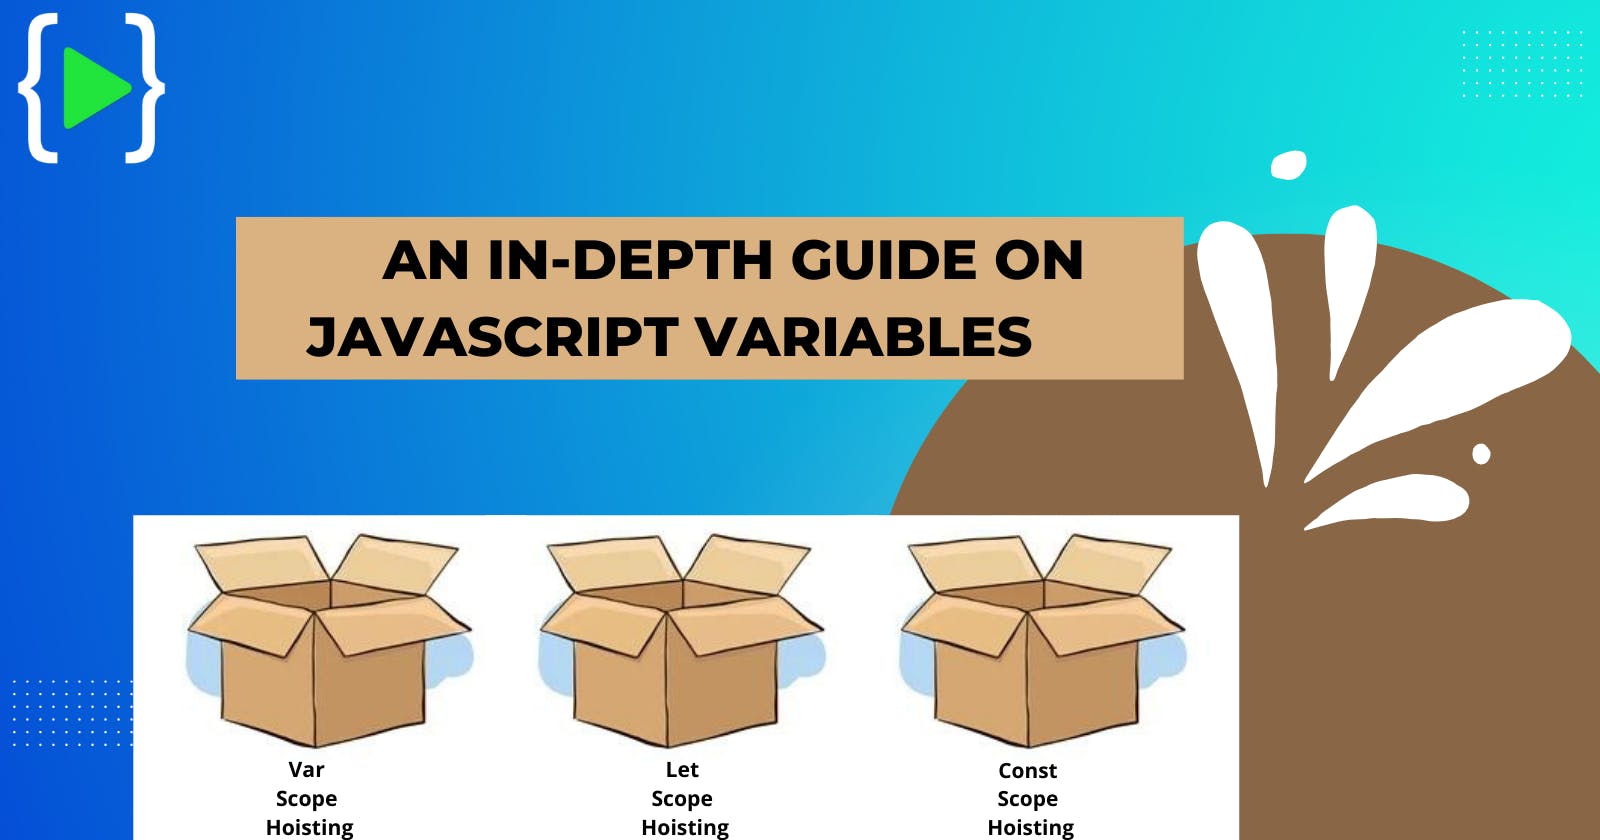 An in-depth guide on JavaScript Variables.